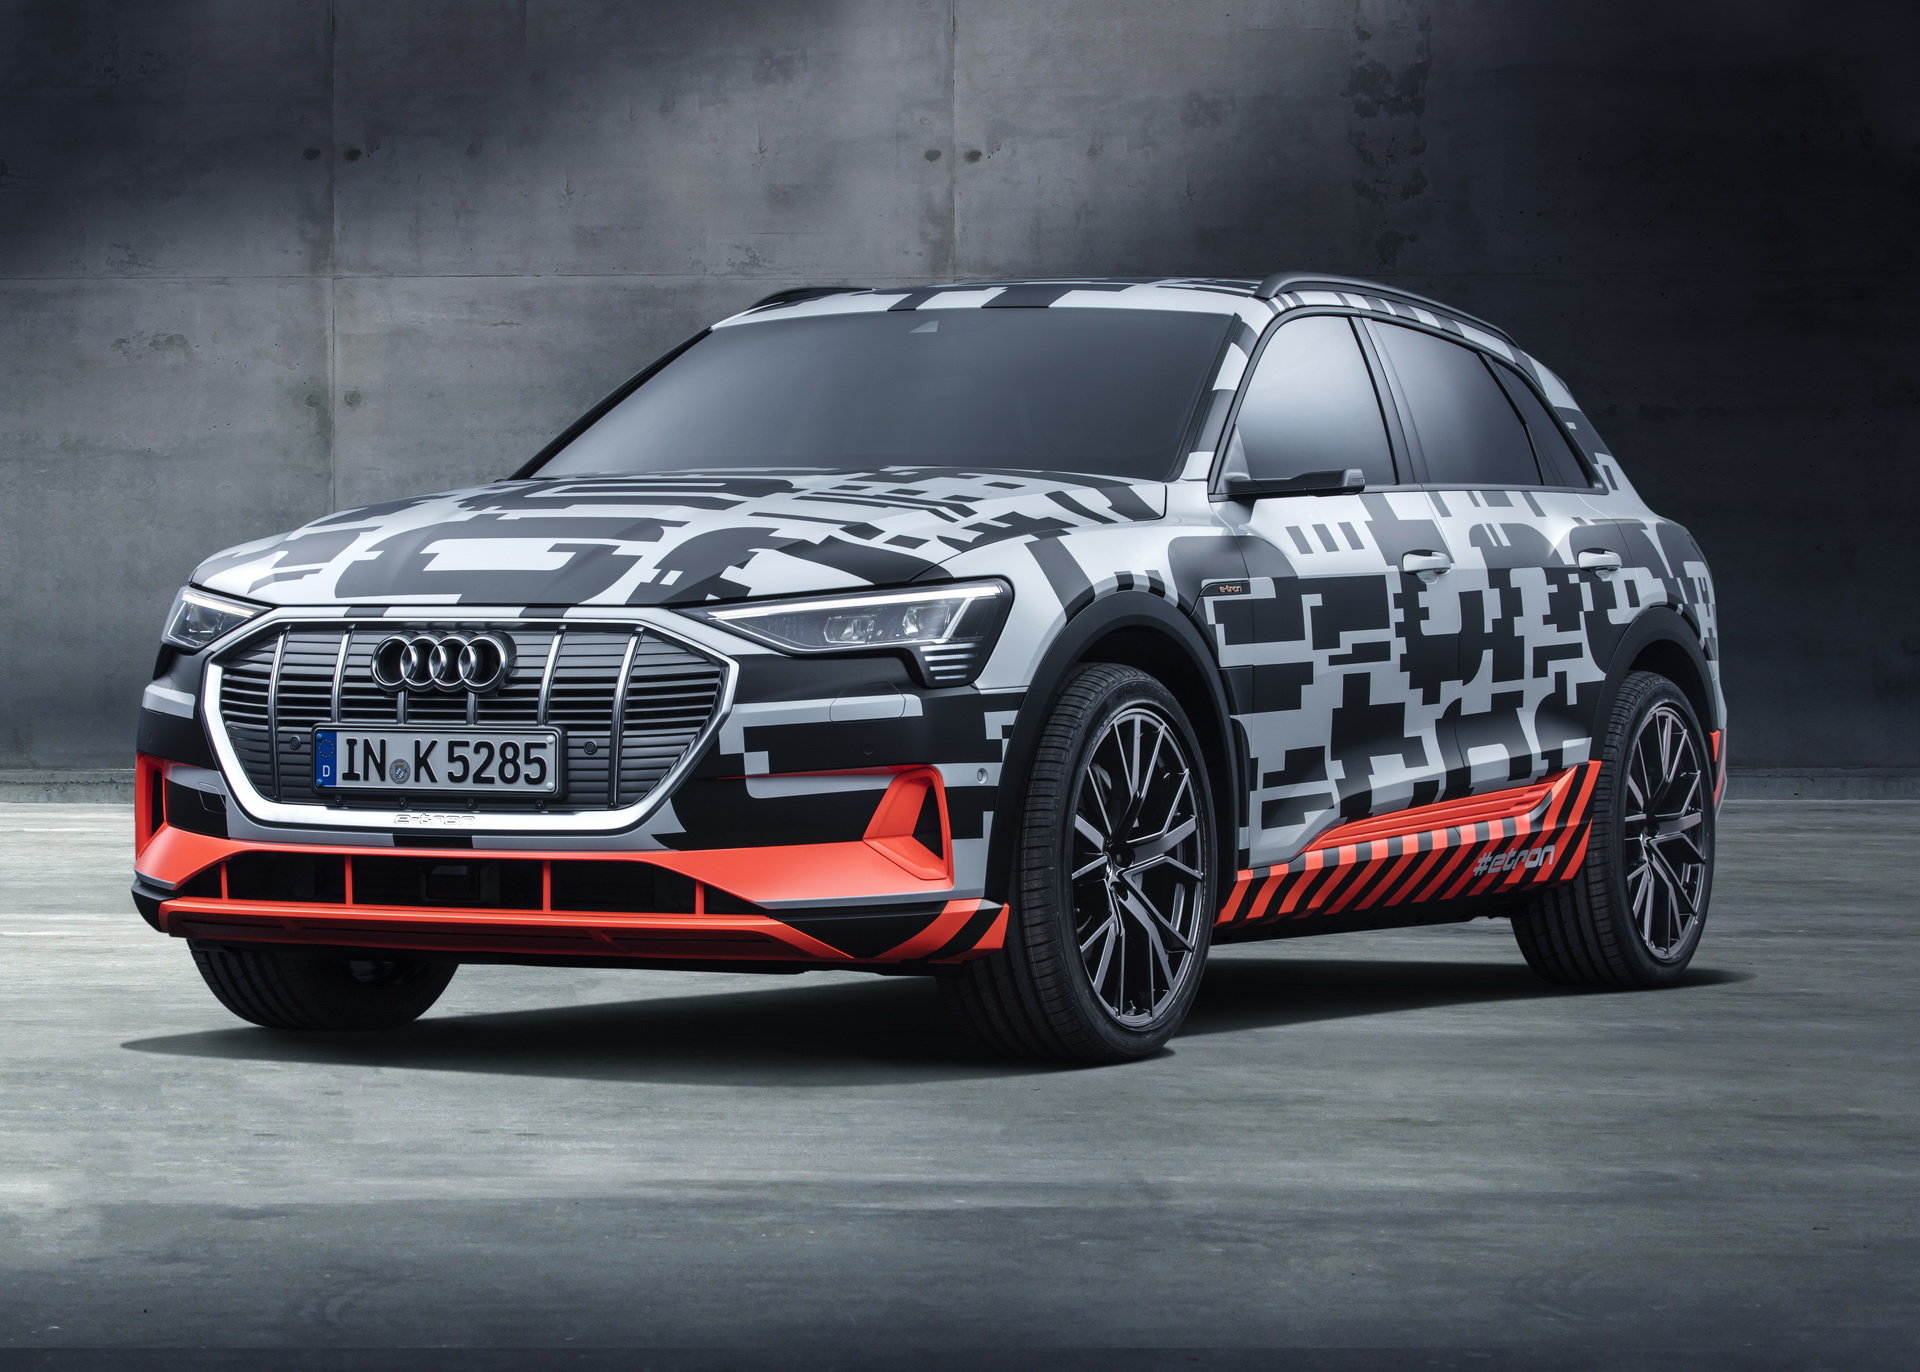 The Audi e-tron prototype offers a preview of the first purely electrically powered model from the brand. The SUV combines a roomy interior with a range capable of covering long distances.